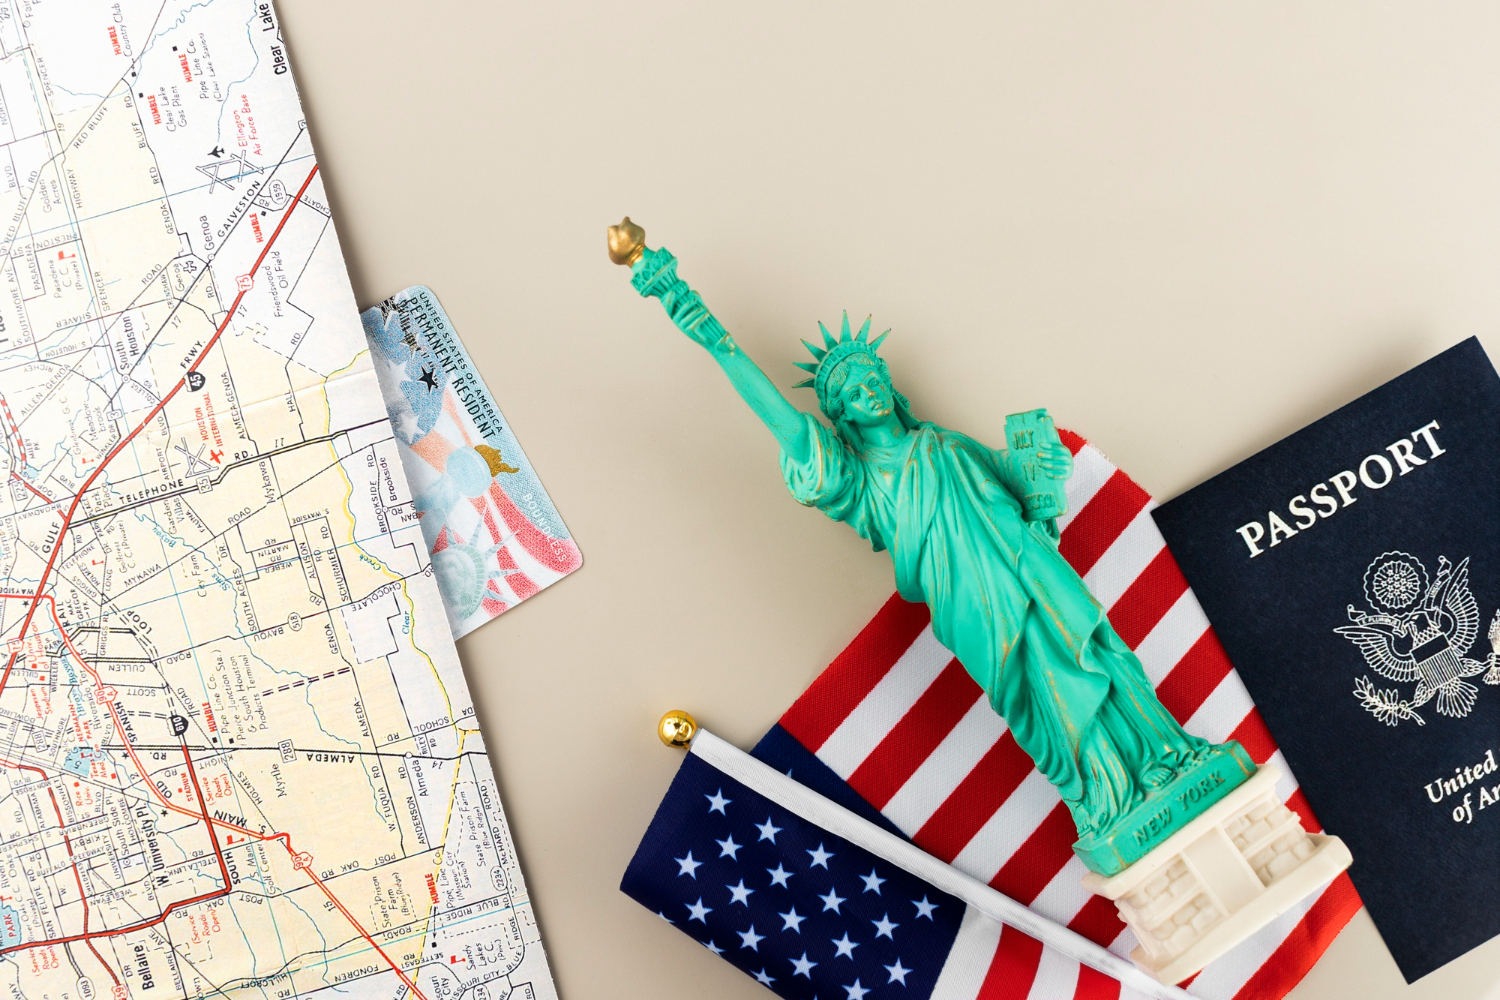 Key Points to Bear in Mind While Applying for a USA Study Visa